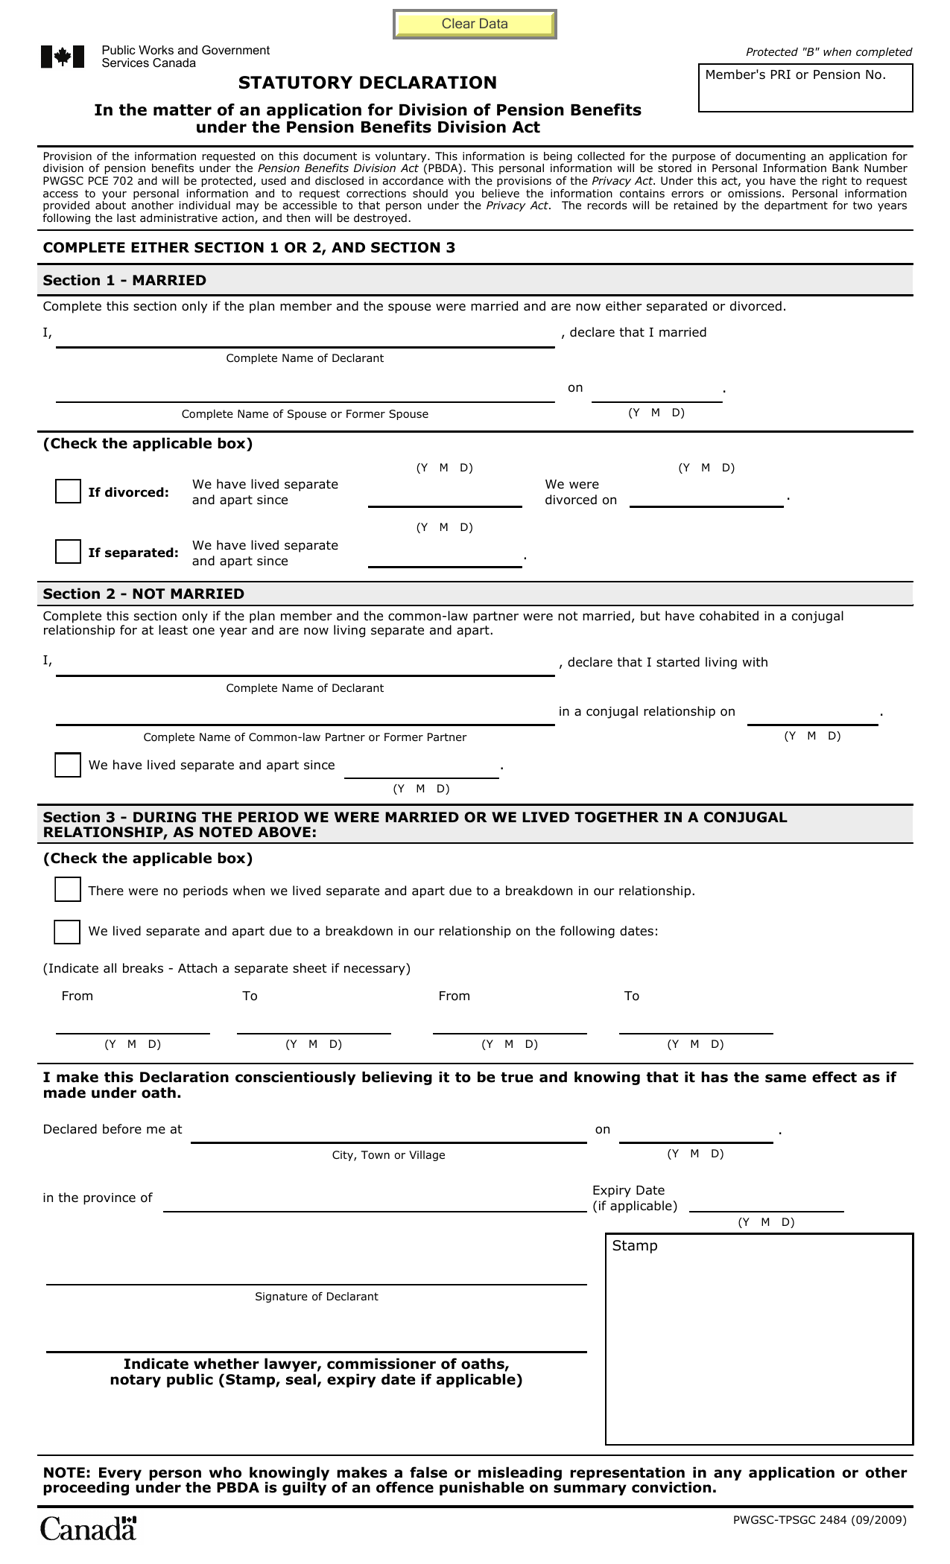 Form PWGSC-TPSGC2484 Statutory Declaration - Canada (English / French), Page 1